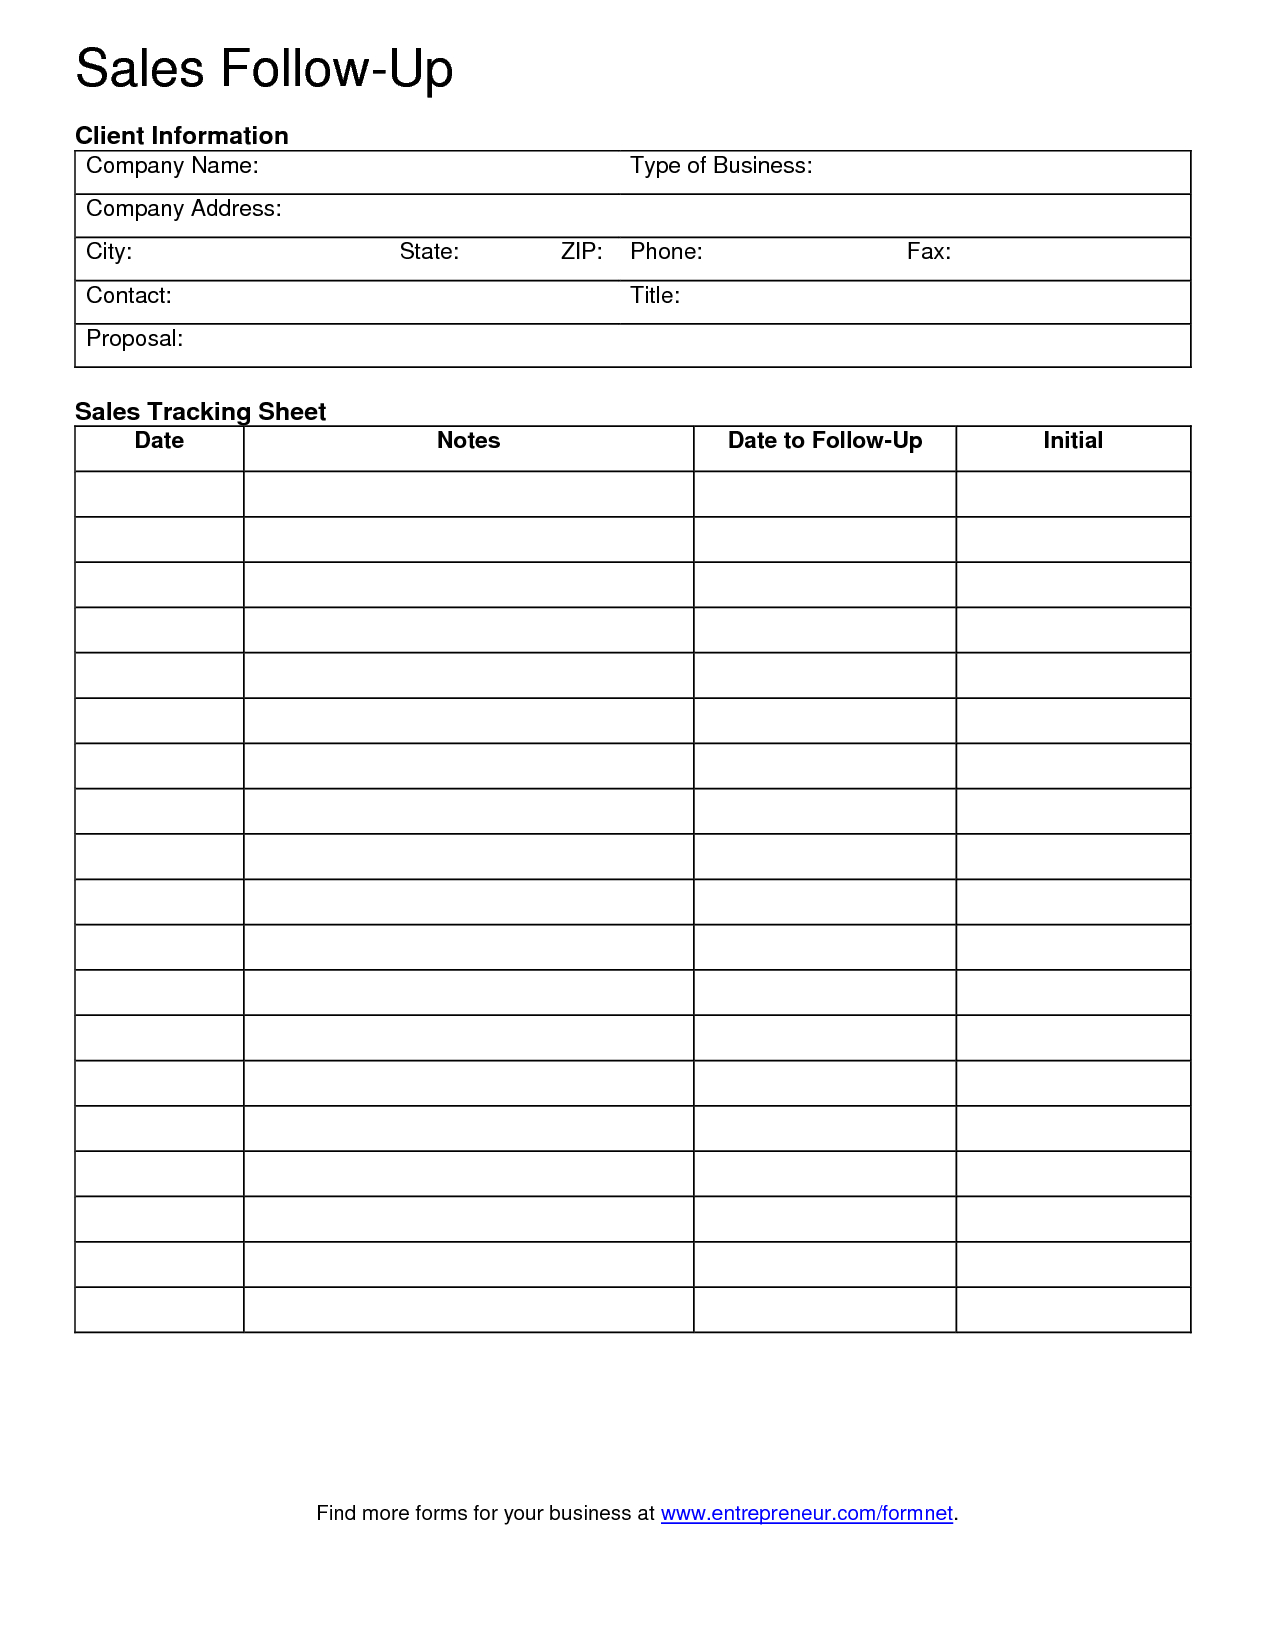 Sales Lead Sheet Template - Demir.iso Consulting.co Together With Sales Lead Template Forms